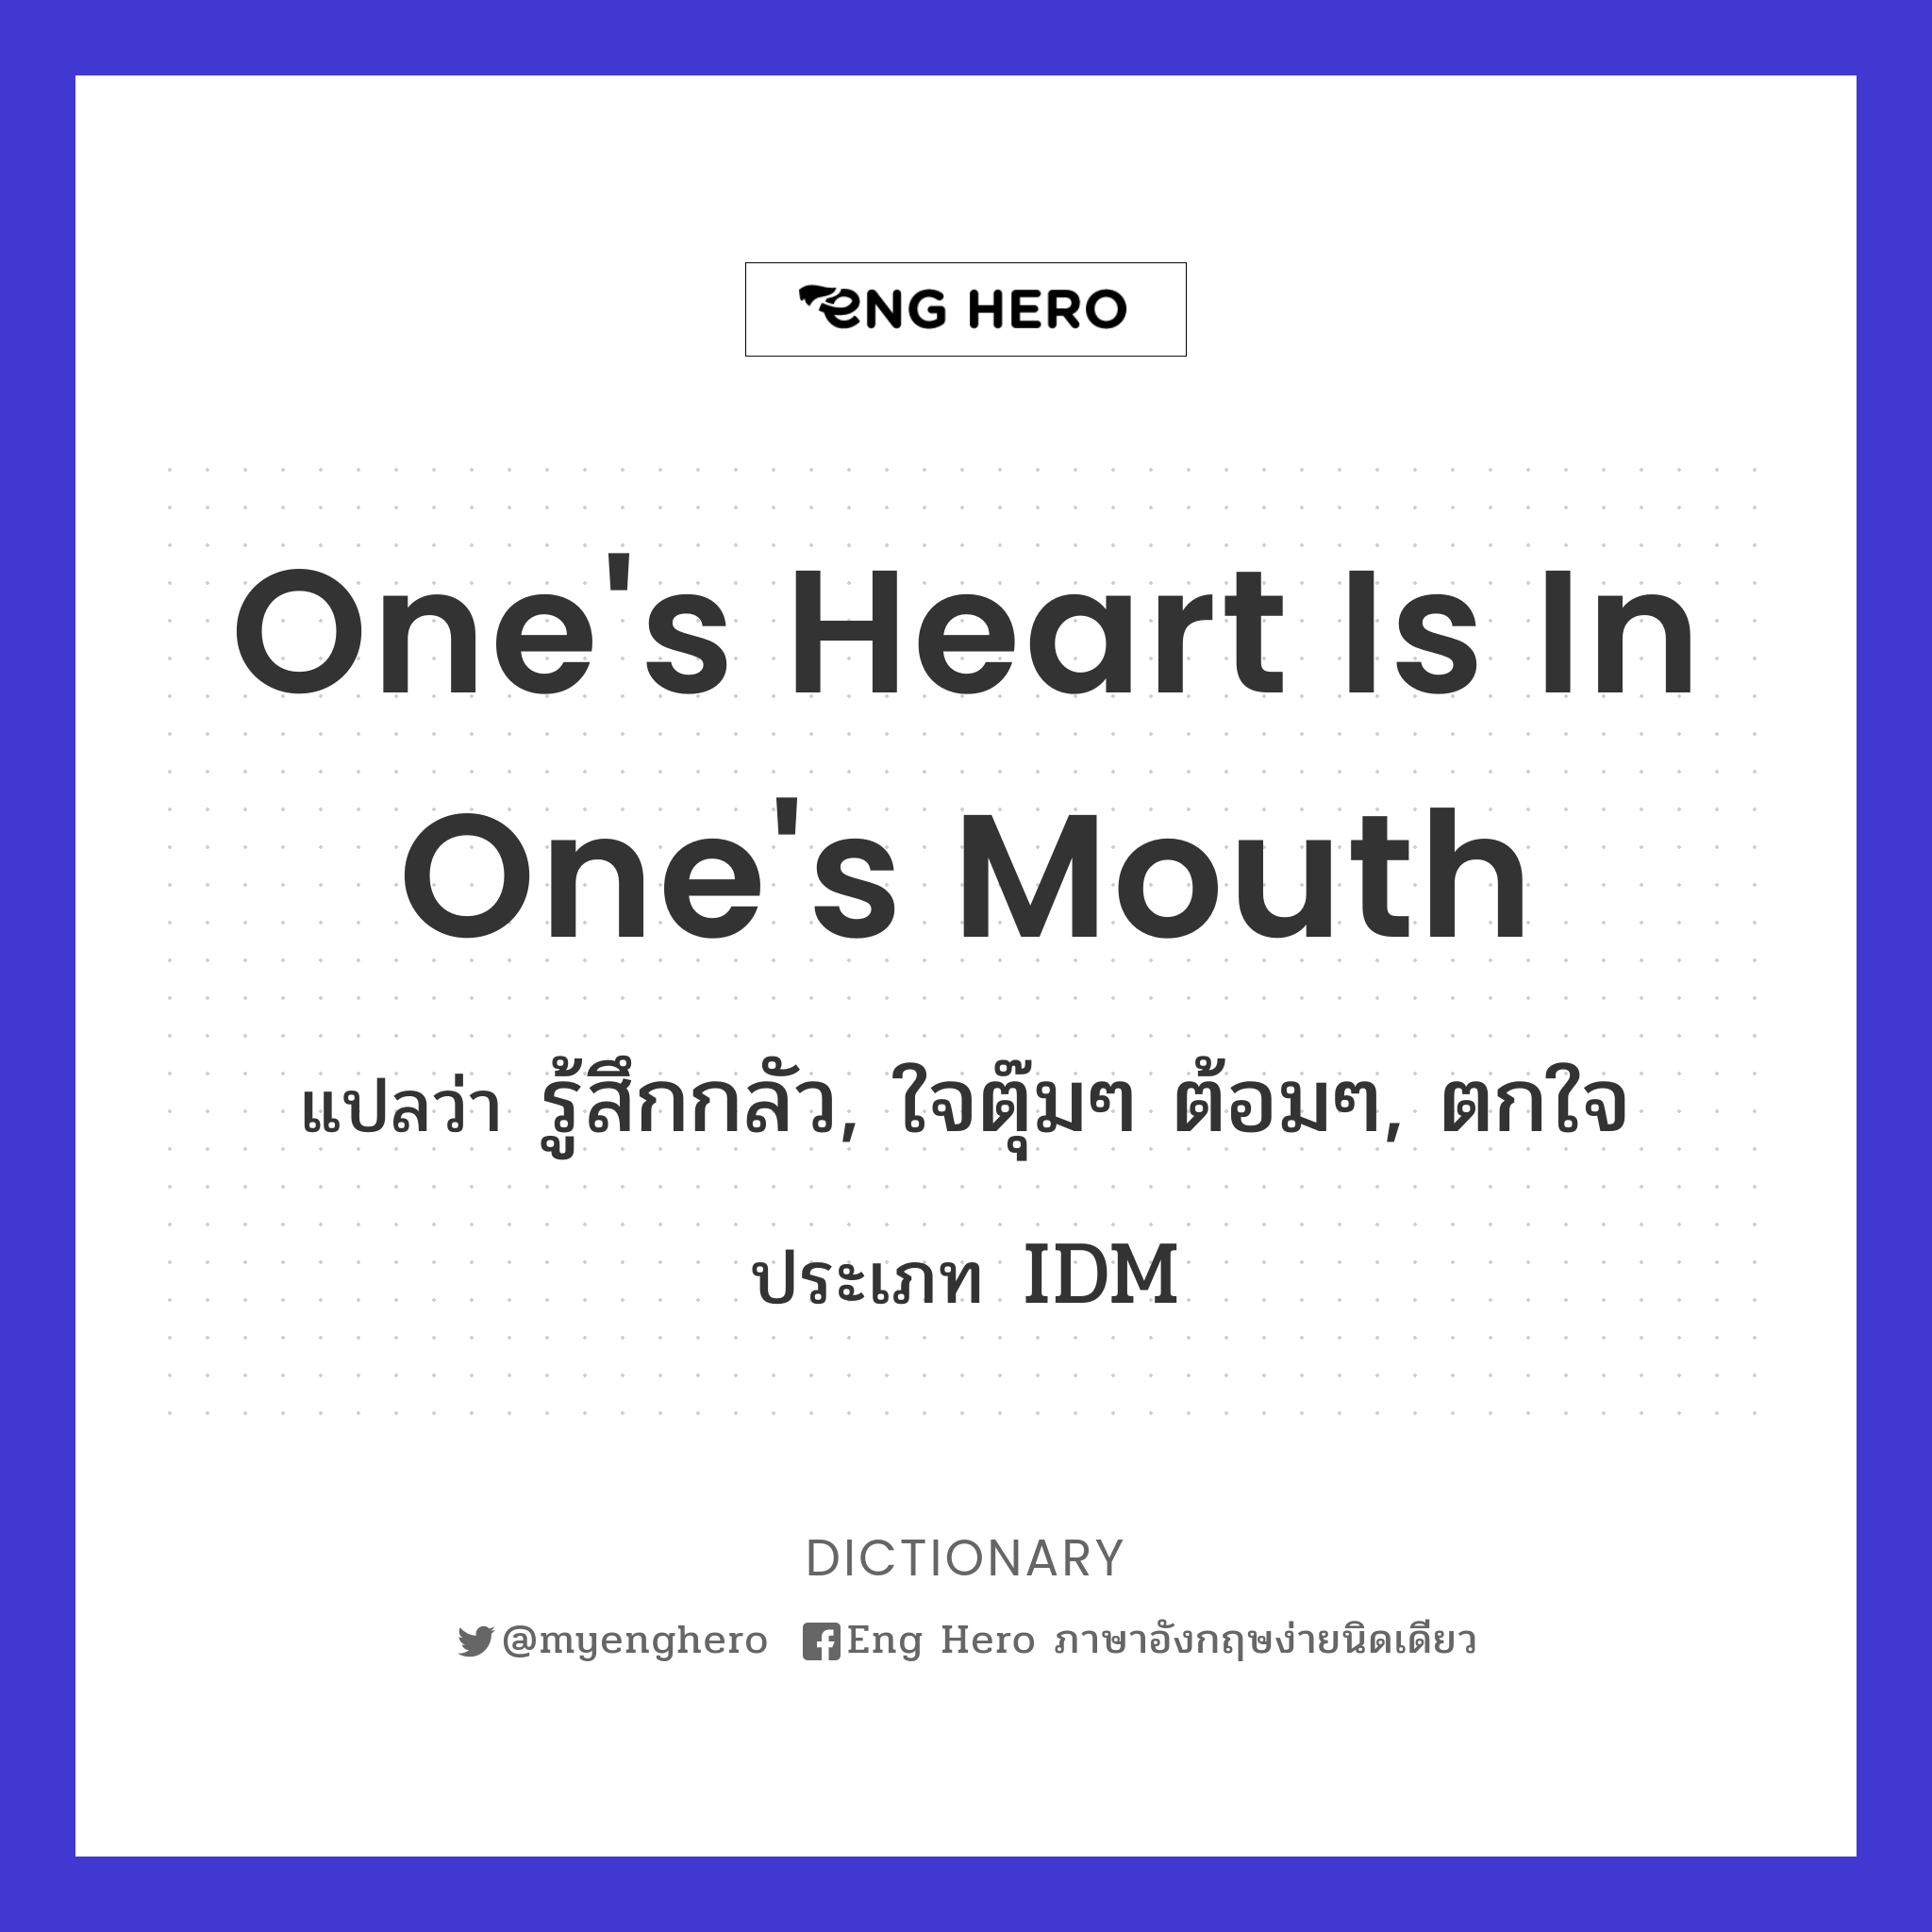 One's heart is in one's mouth